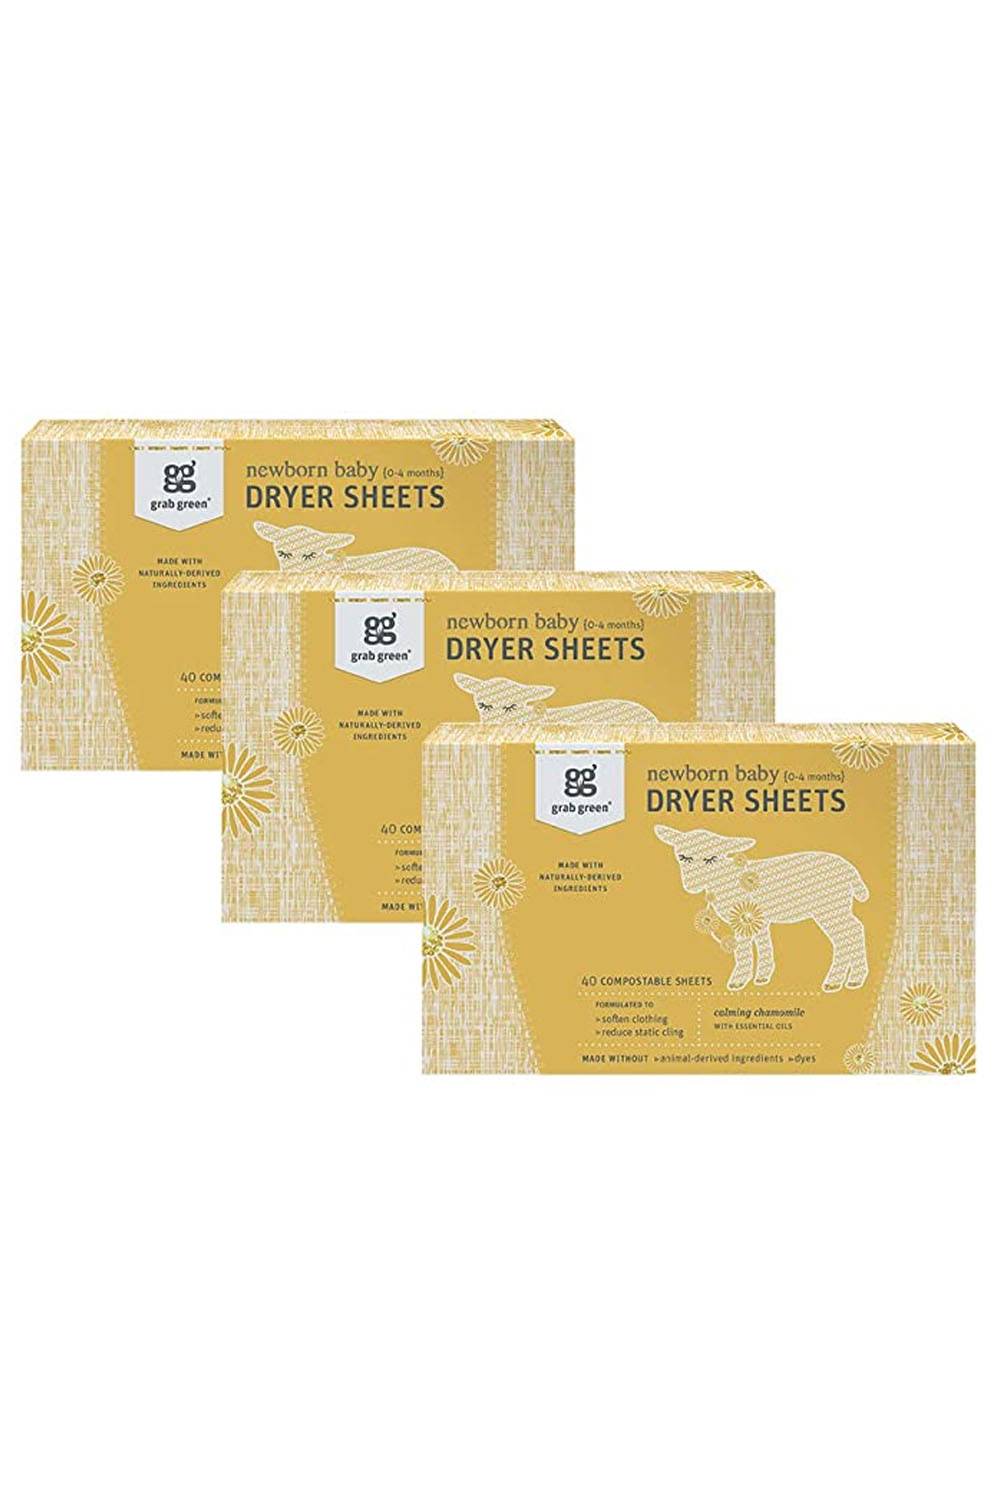 grab green compostable dryer sheets